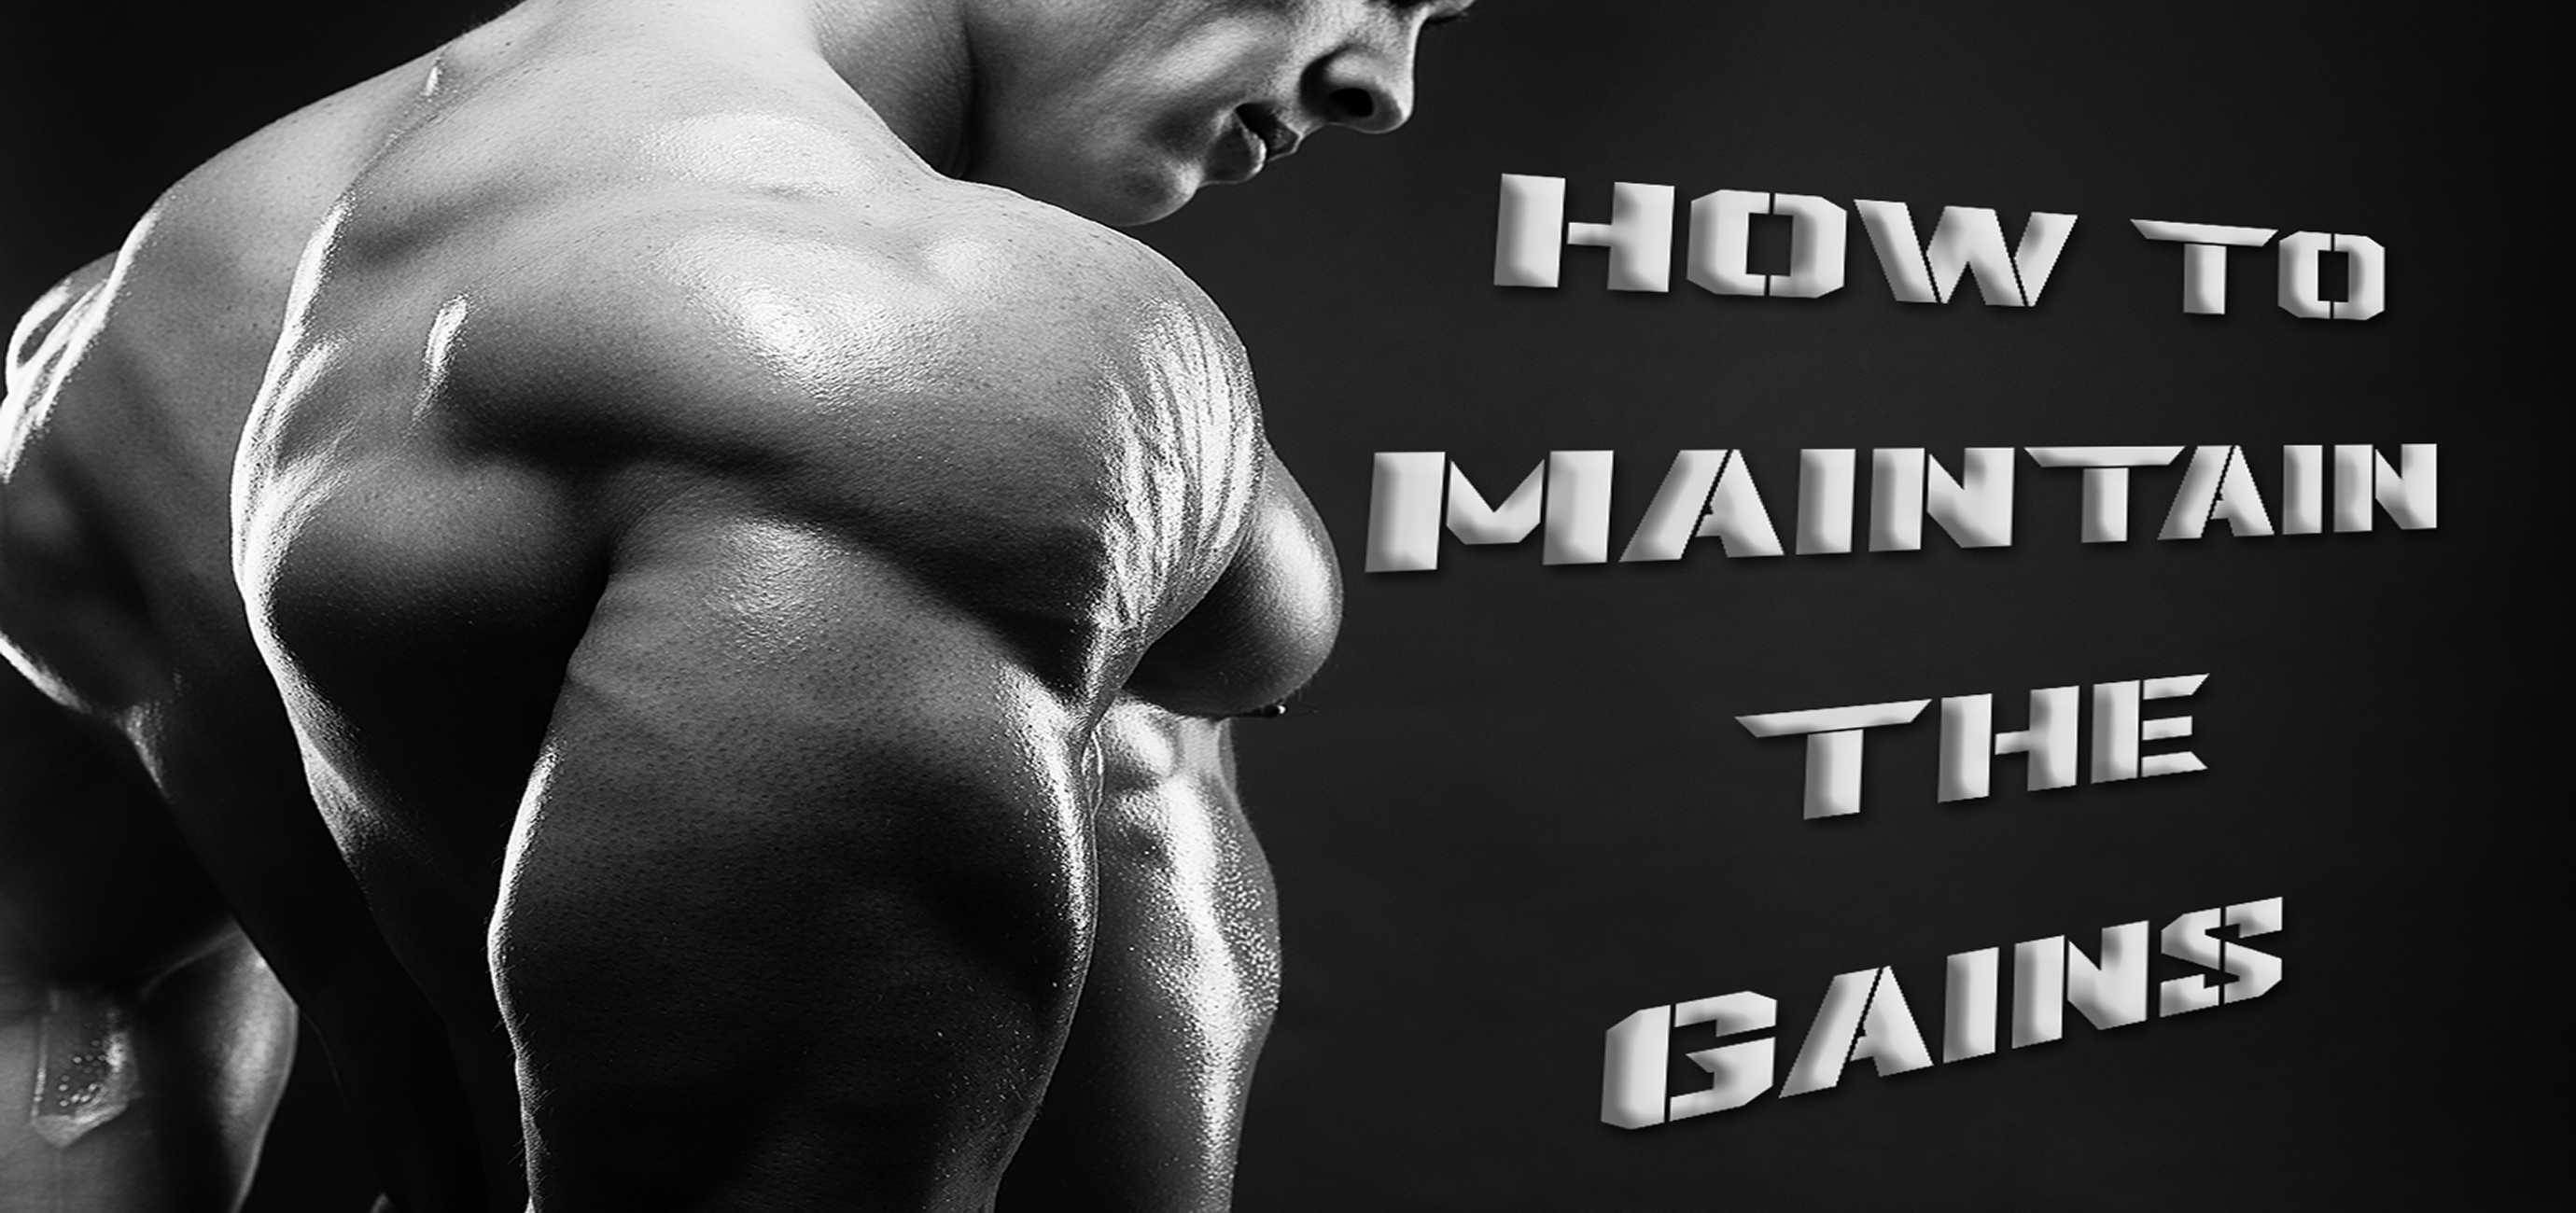 HOW TO MAINTAIN THE GAINS